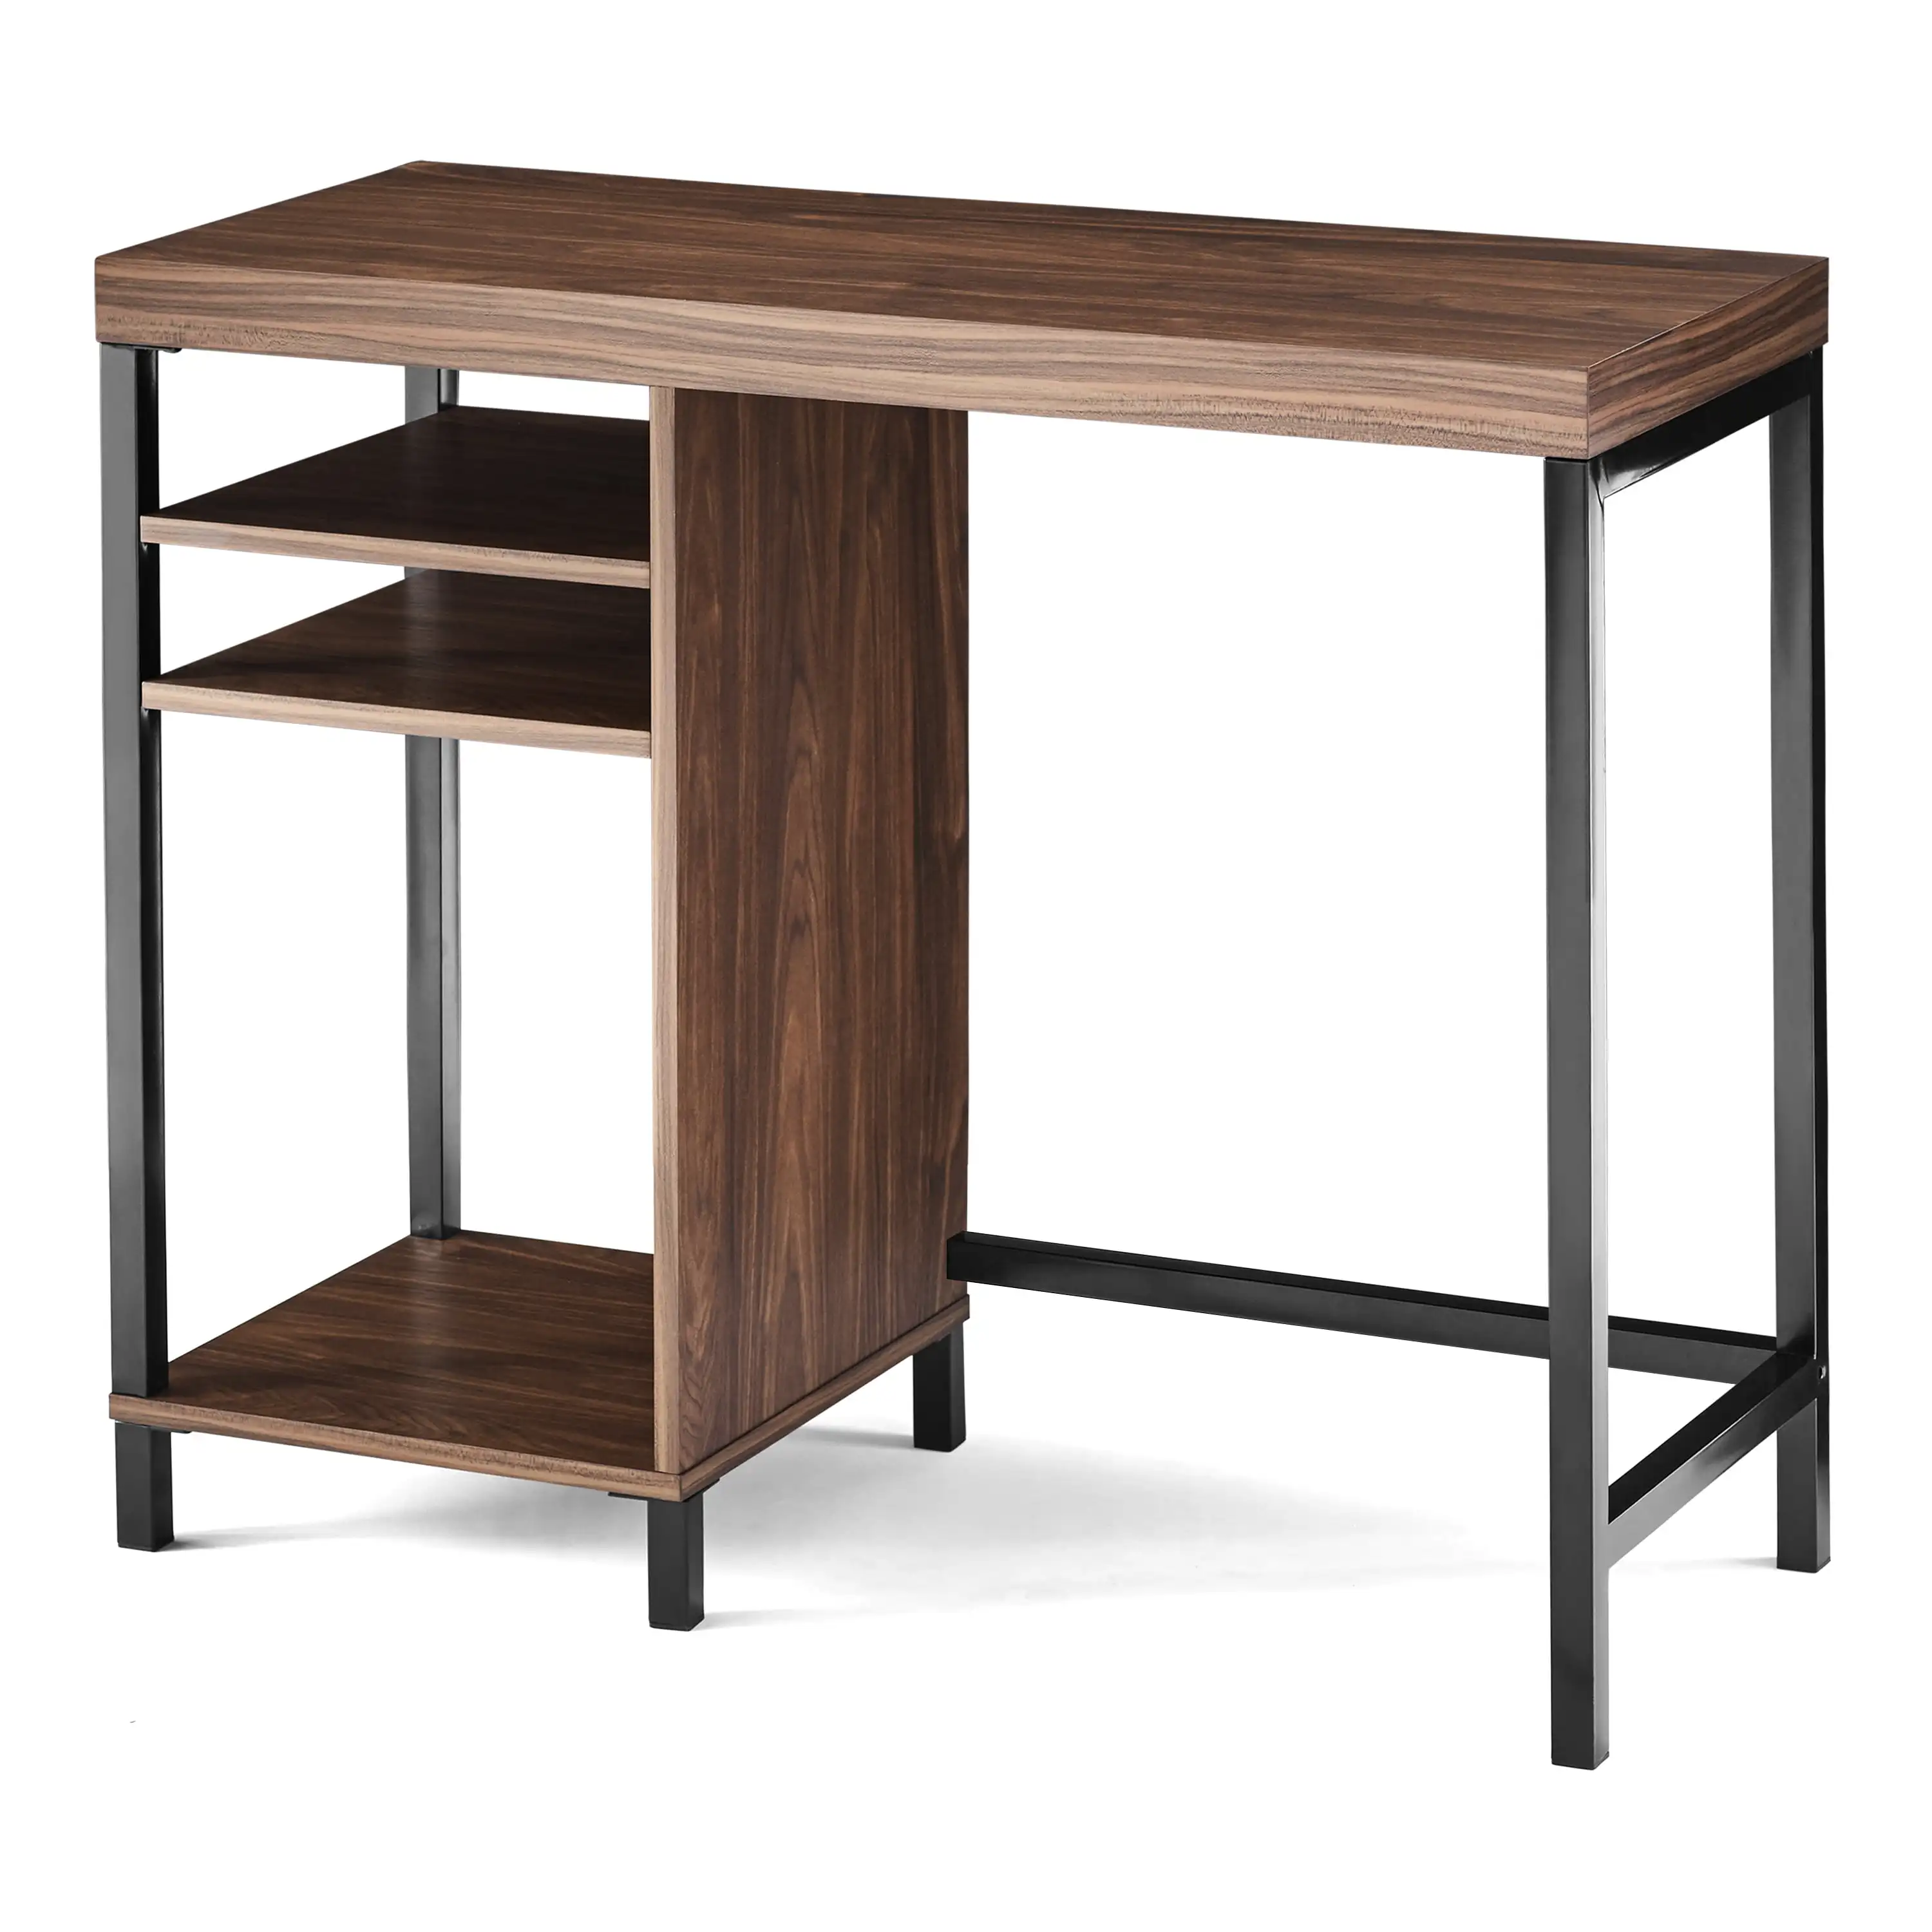 

Mainstays Sumpter Park Collection - Mainstays Sumpter Park Cube Storage Desk in Canyon Walnut